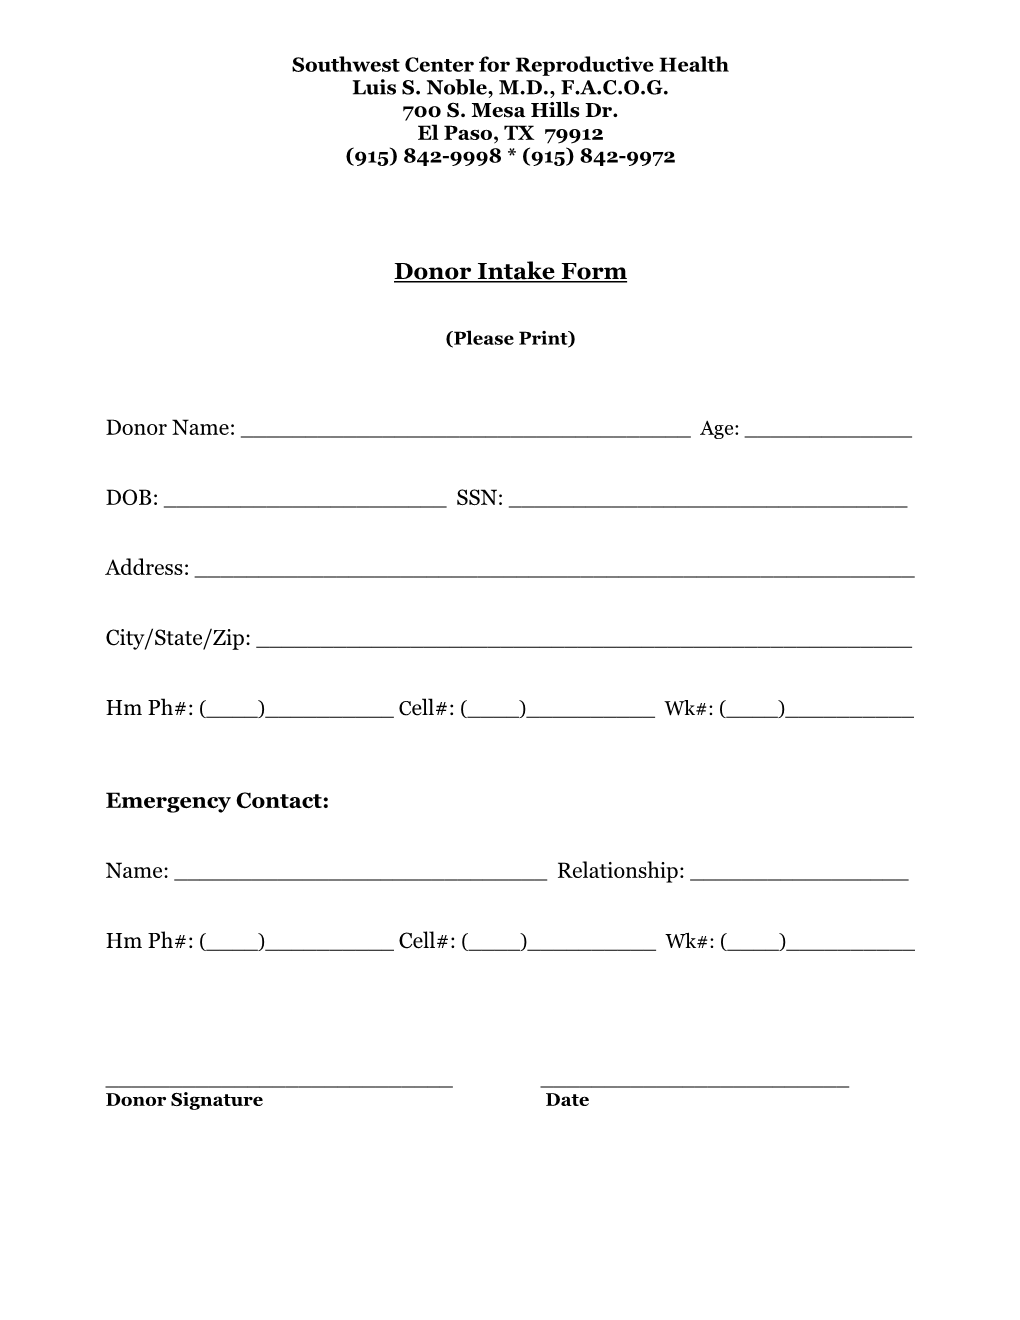 Donor Intake Form